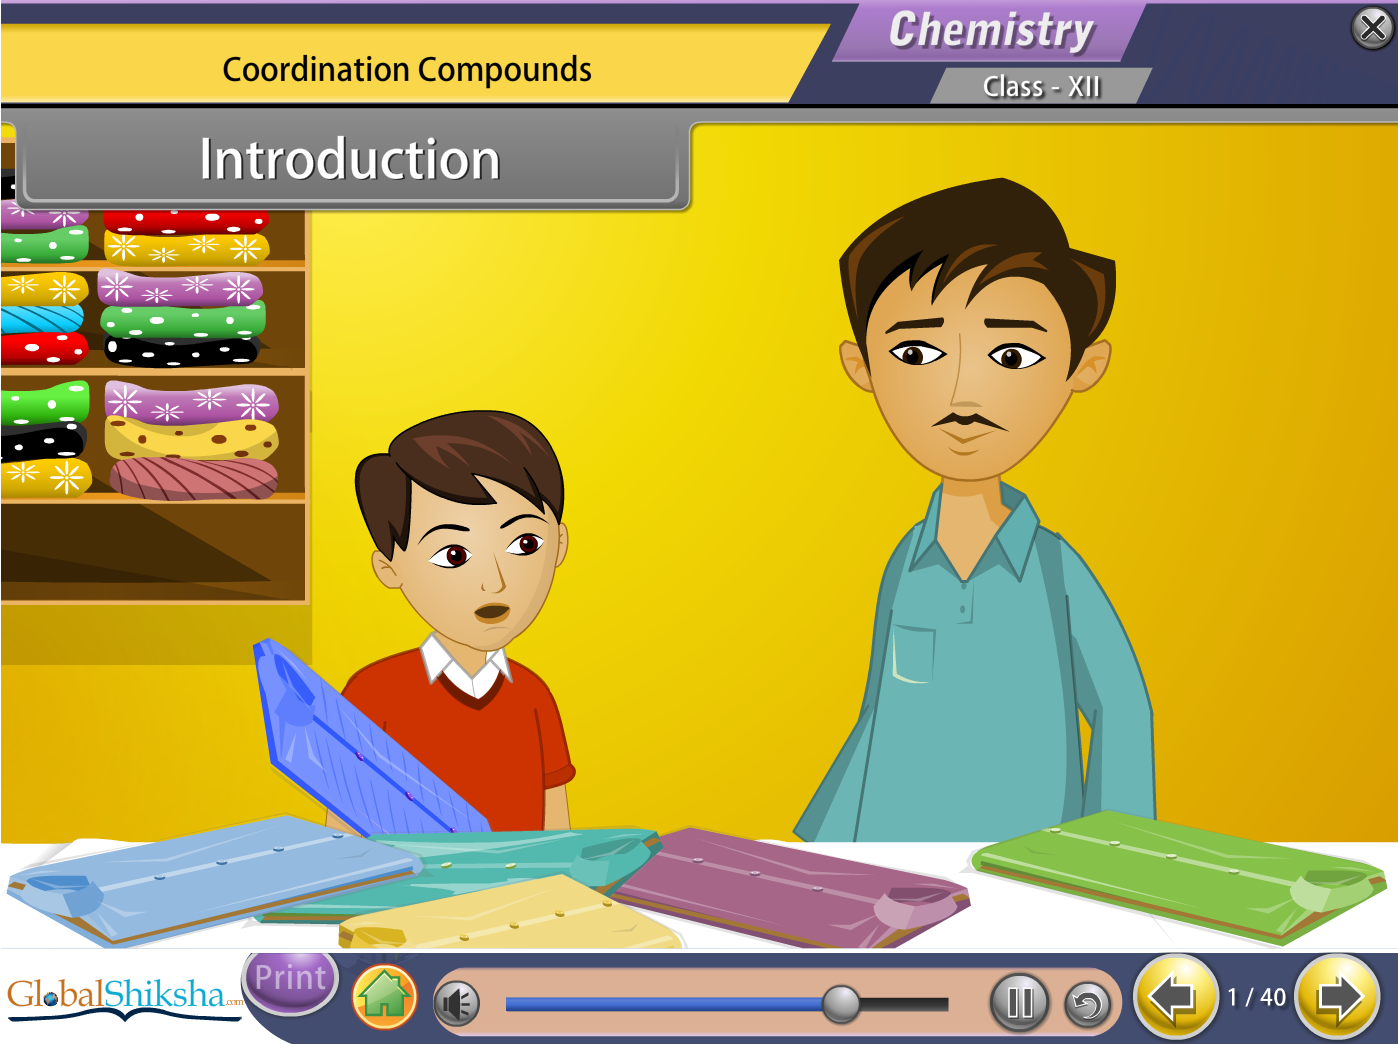 Maharashtra State Board Class 12 PCMB [Physics, Chemistry, Maths & Biology] Animated Pendrive in English